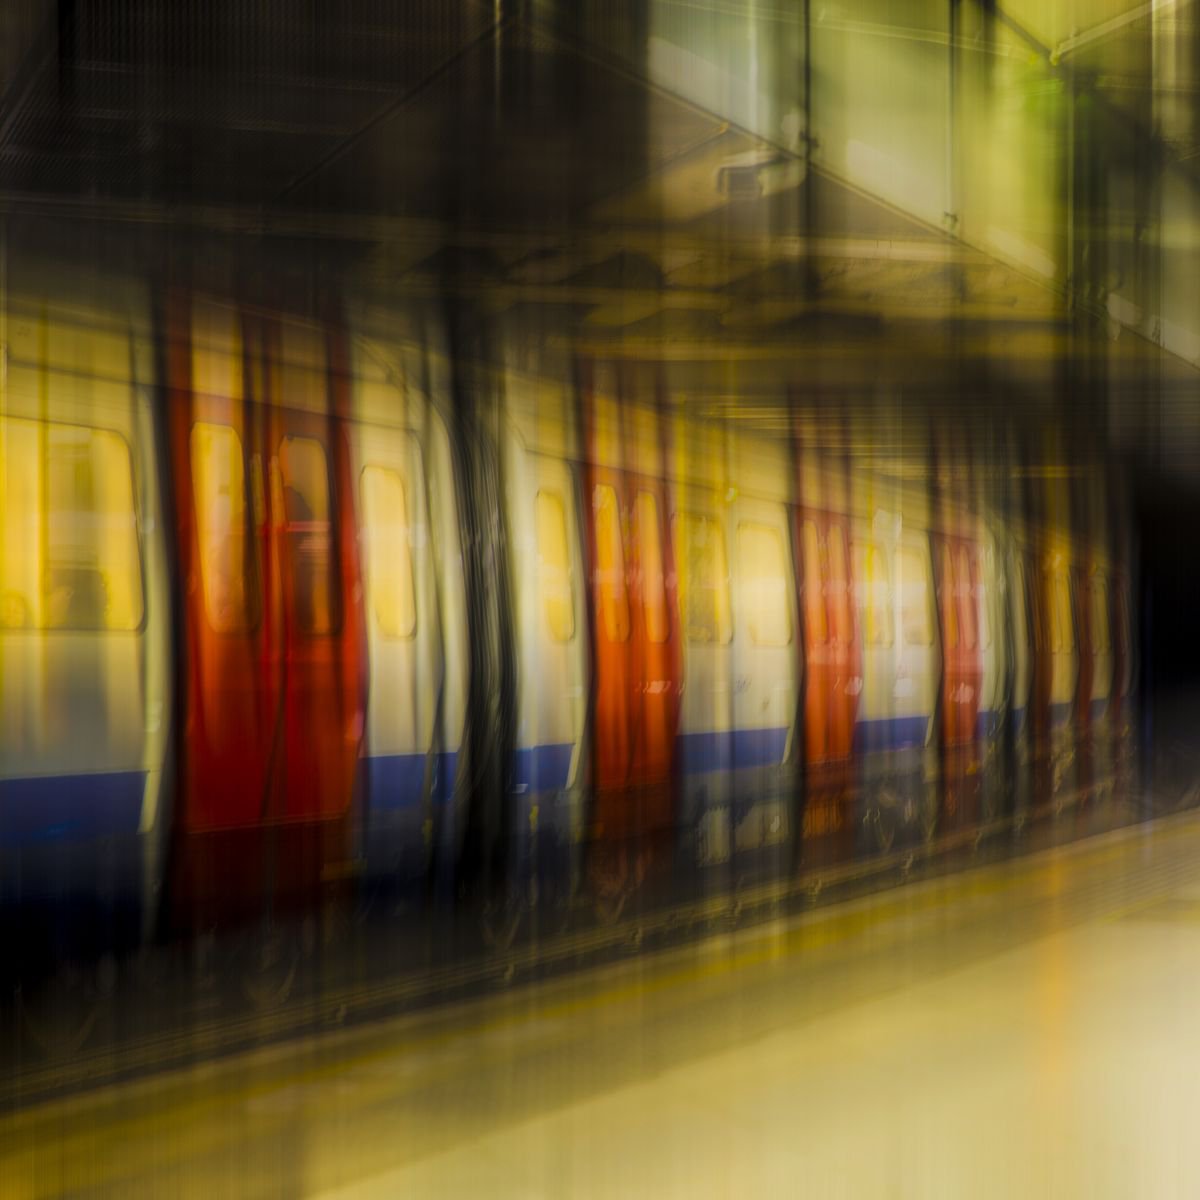 Abstract London: The Tube by Graham Briggs